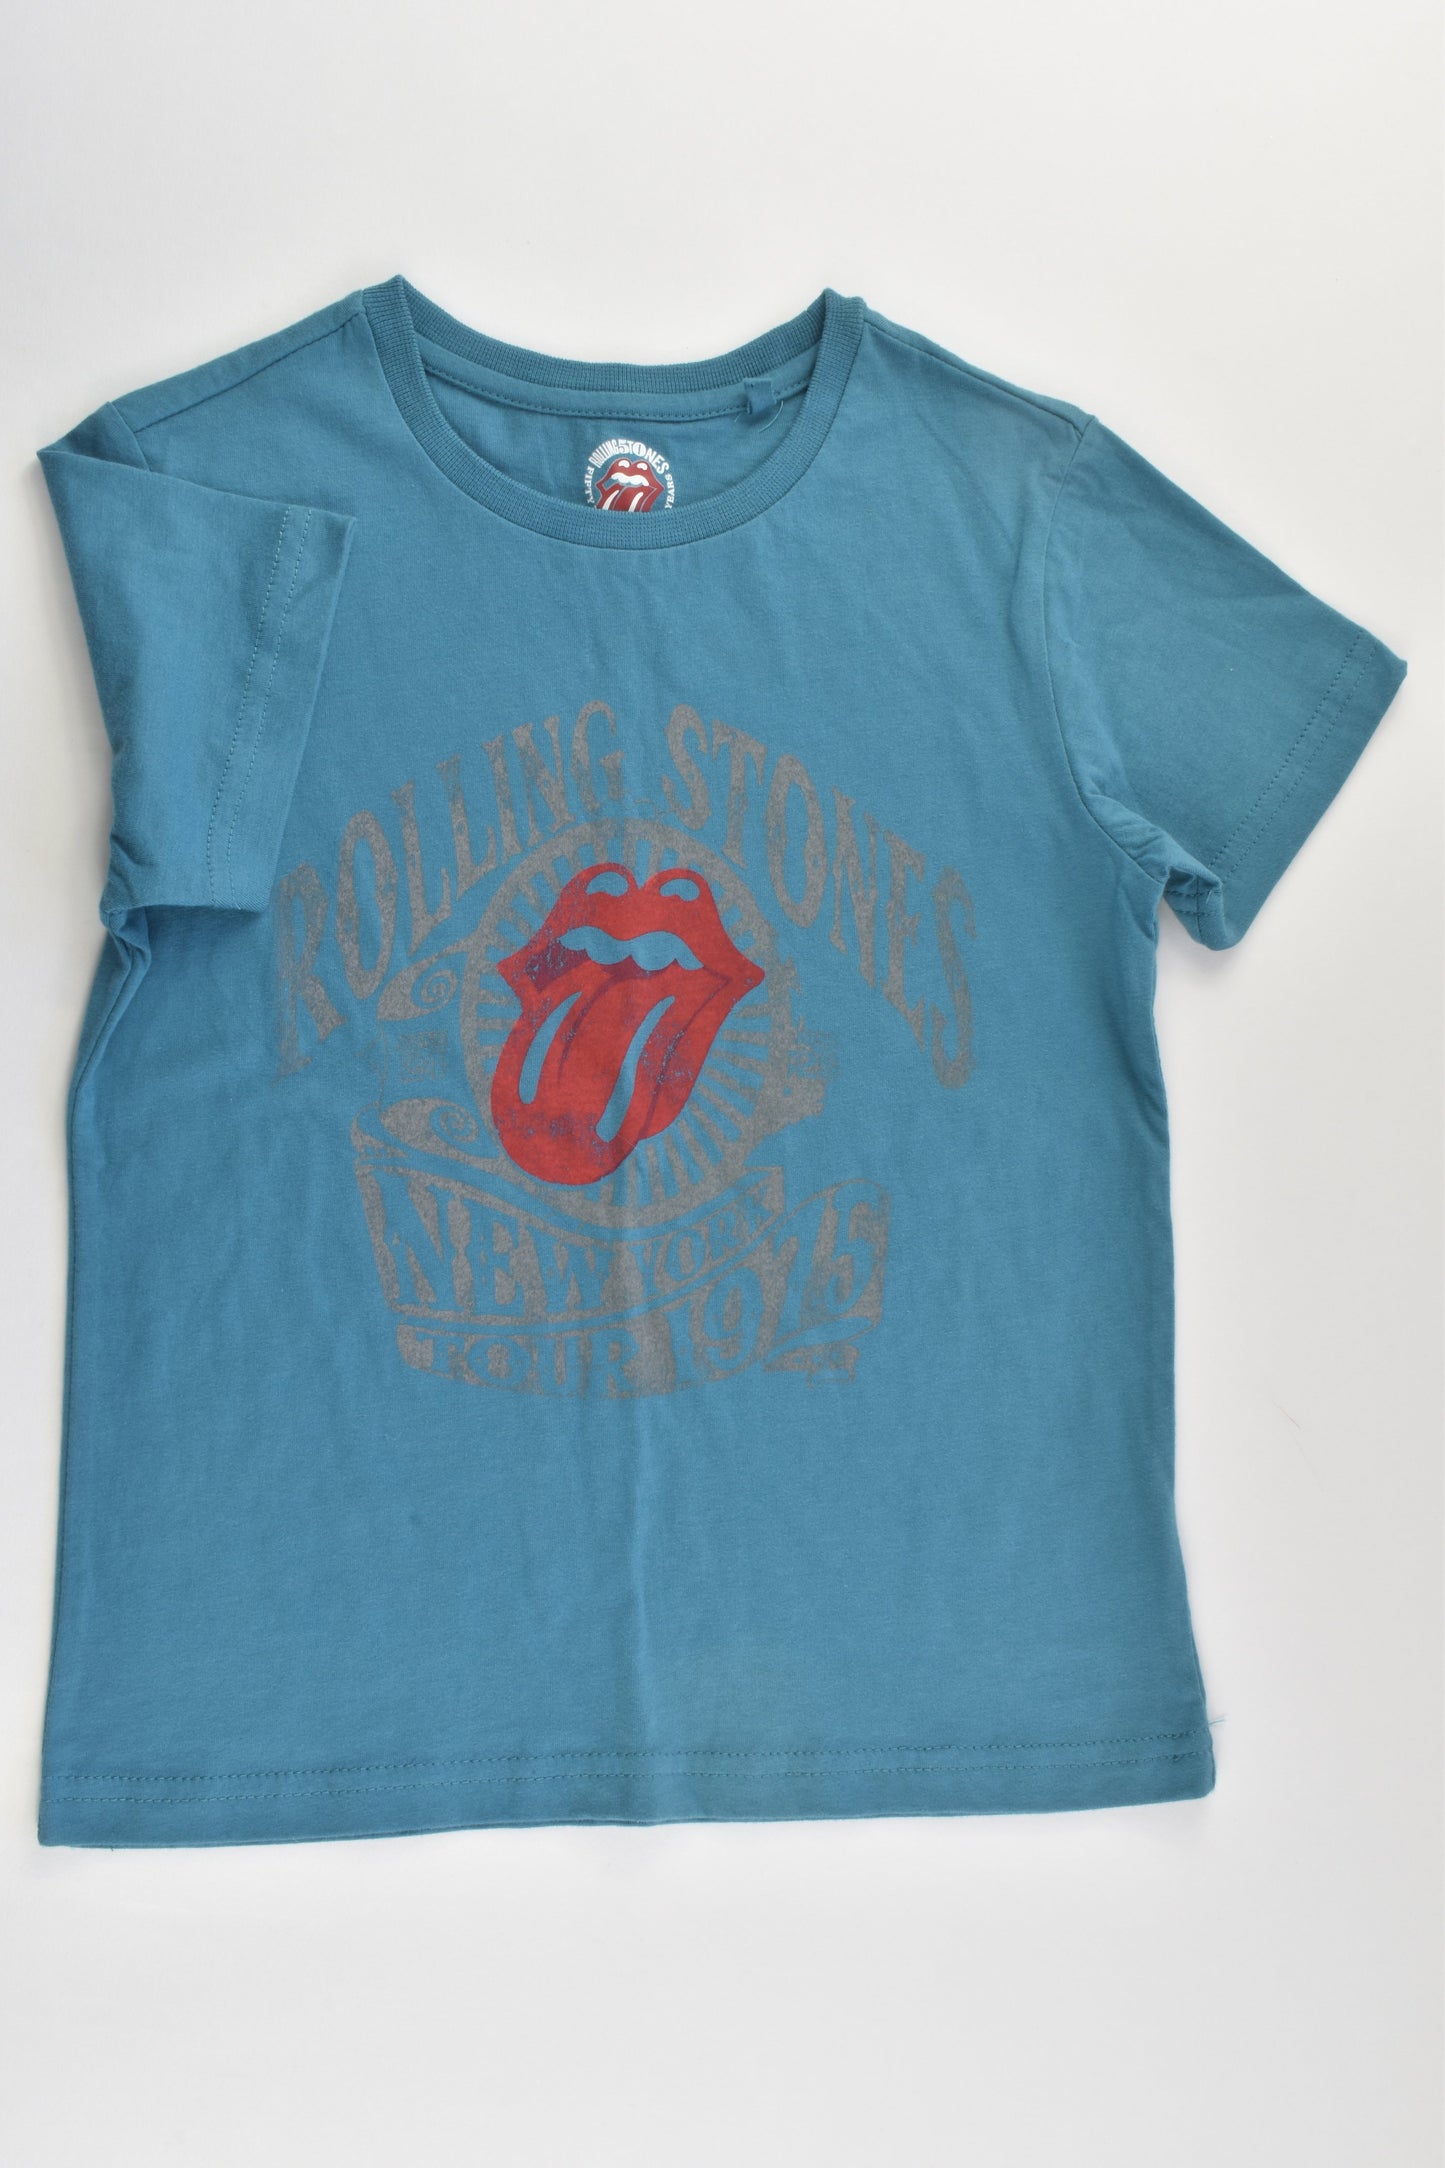 NEW Rolling Stones by Target Size 5 T-shirt